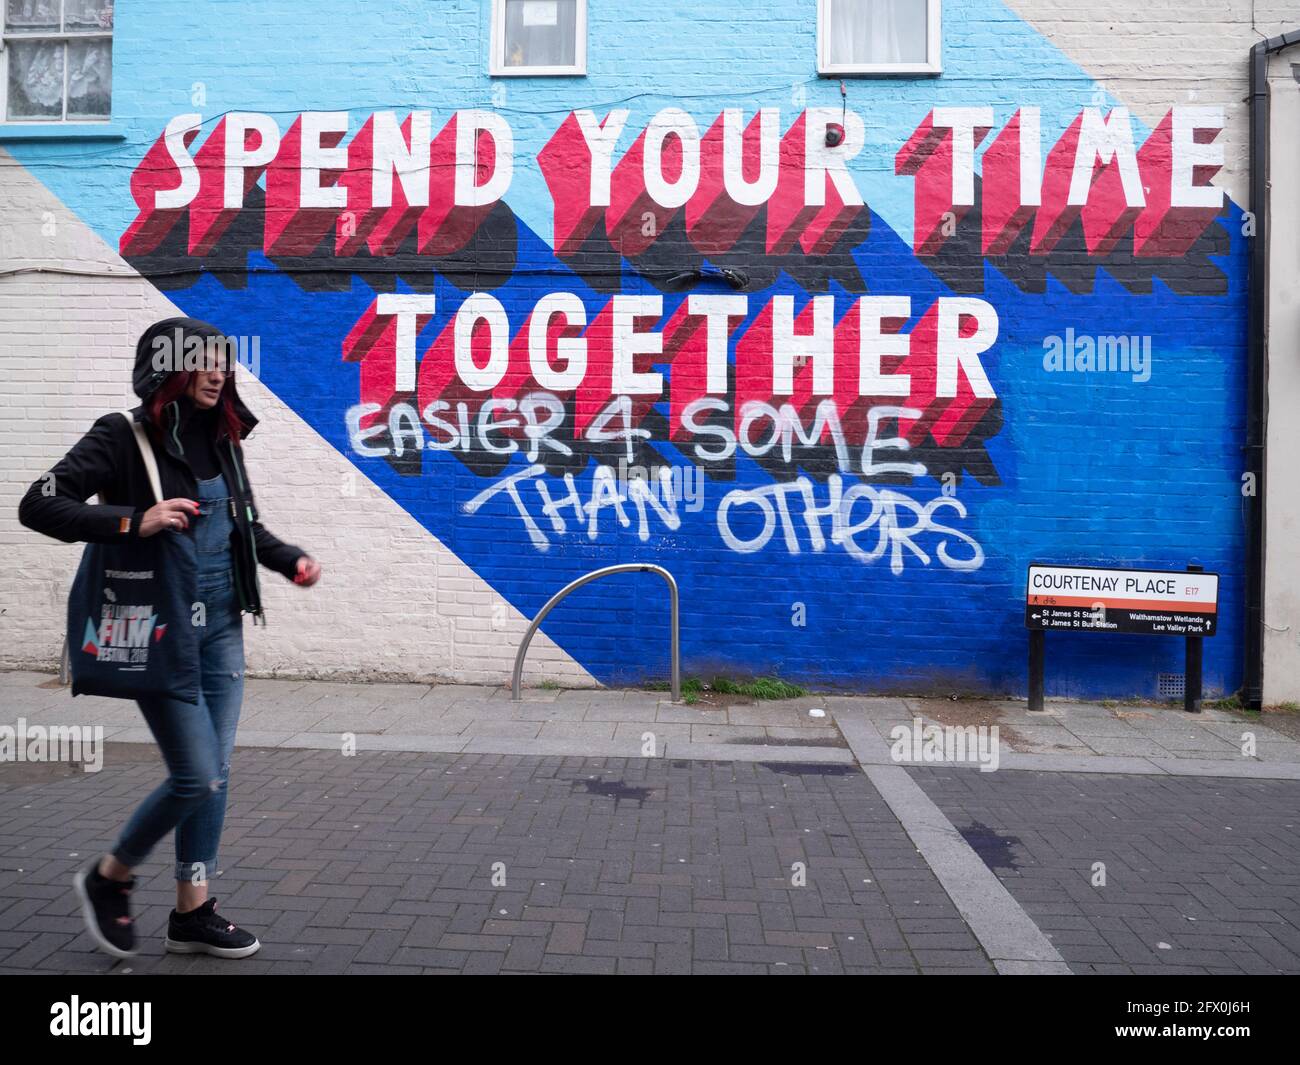 Graffiti Walthamstow High Street, London reading Spend your time together and easier for some than others Stock Photo